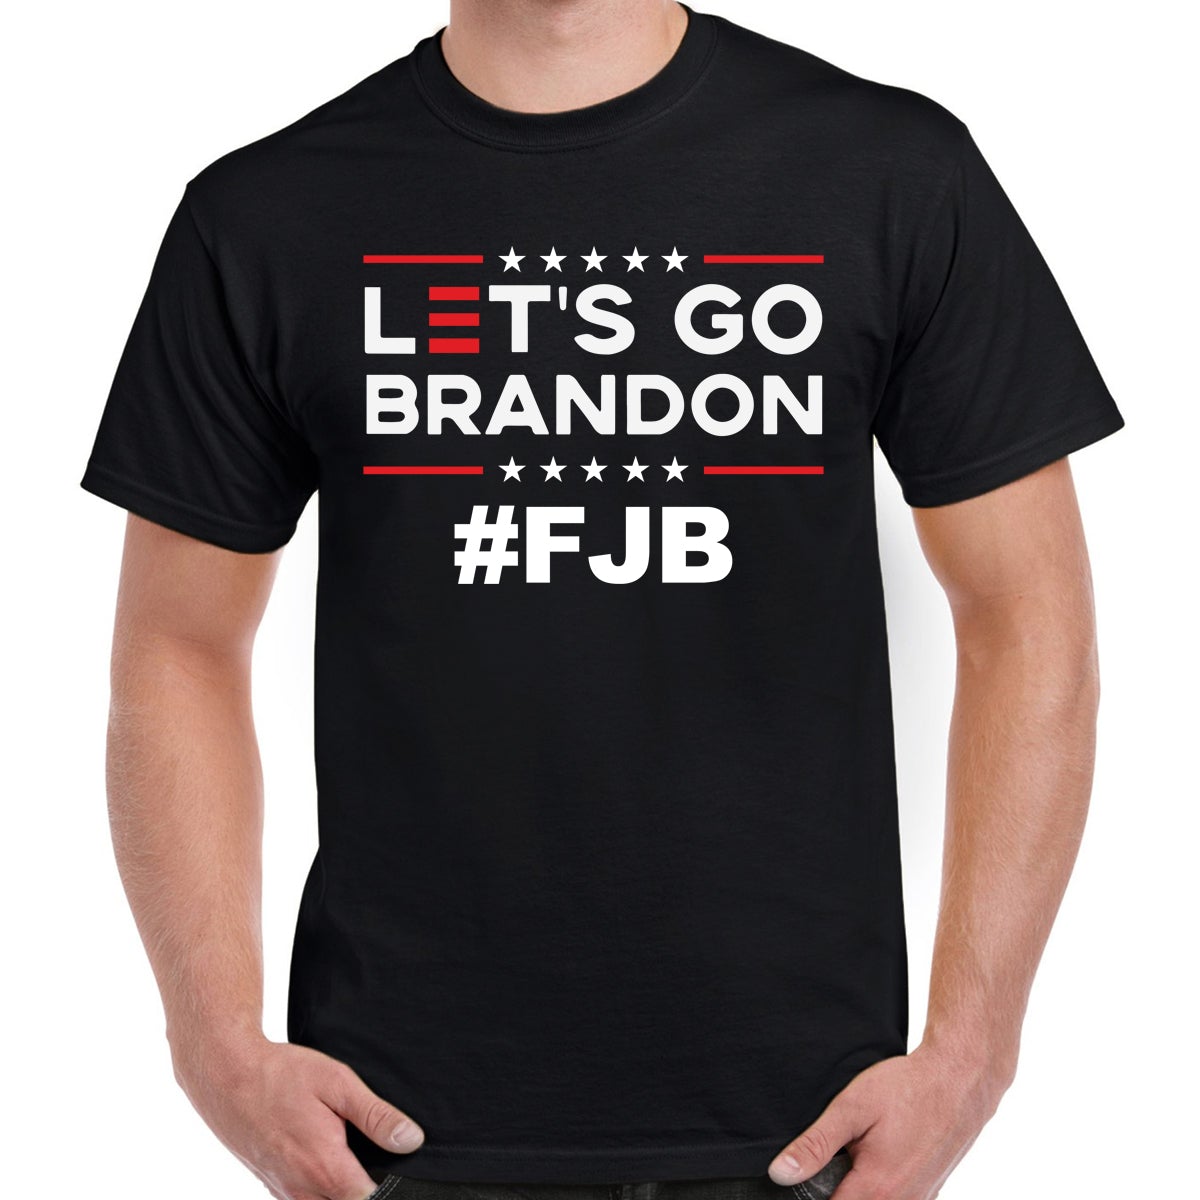 Let's Go Brandon” T-Shirt, Men's Size XXL, New – To Die For Collectibles